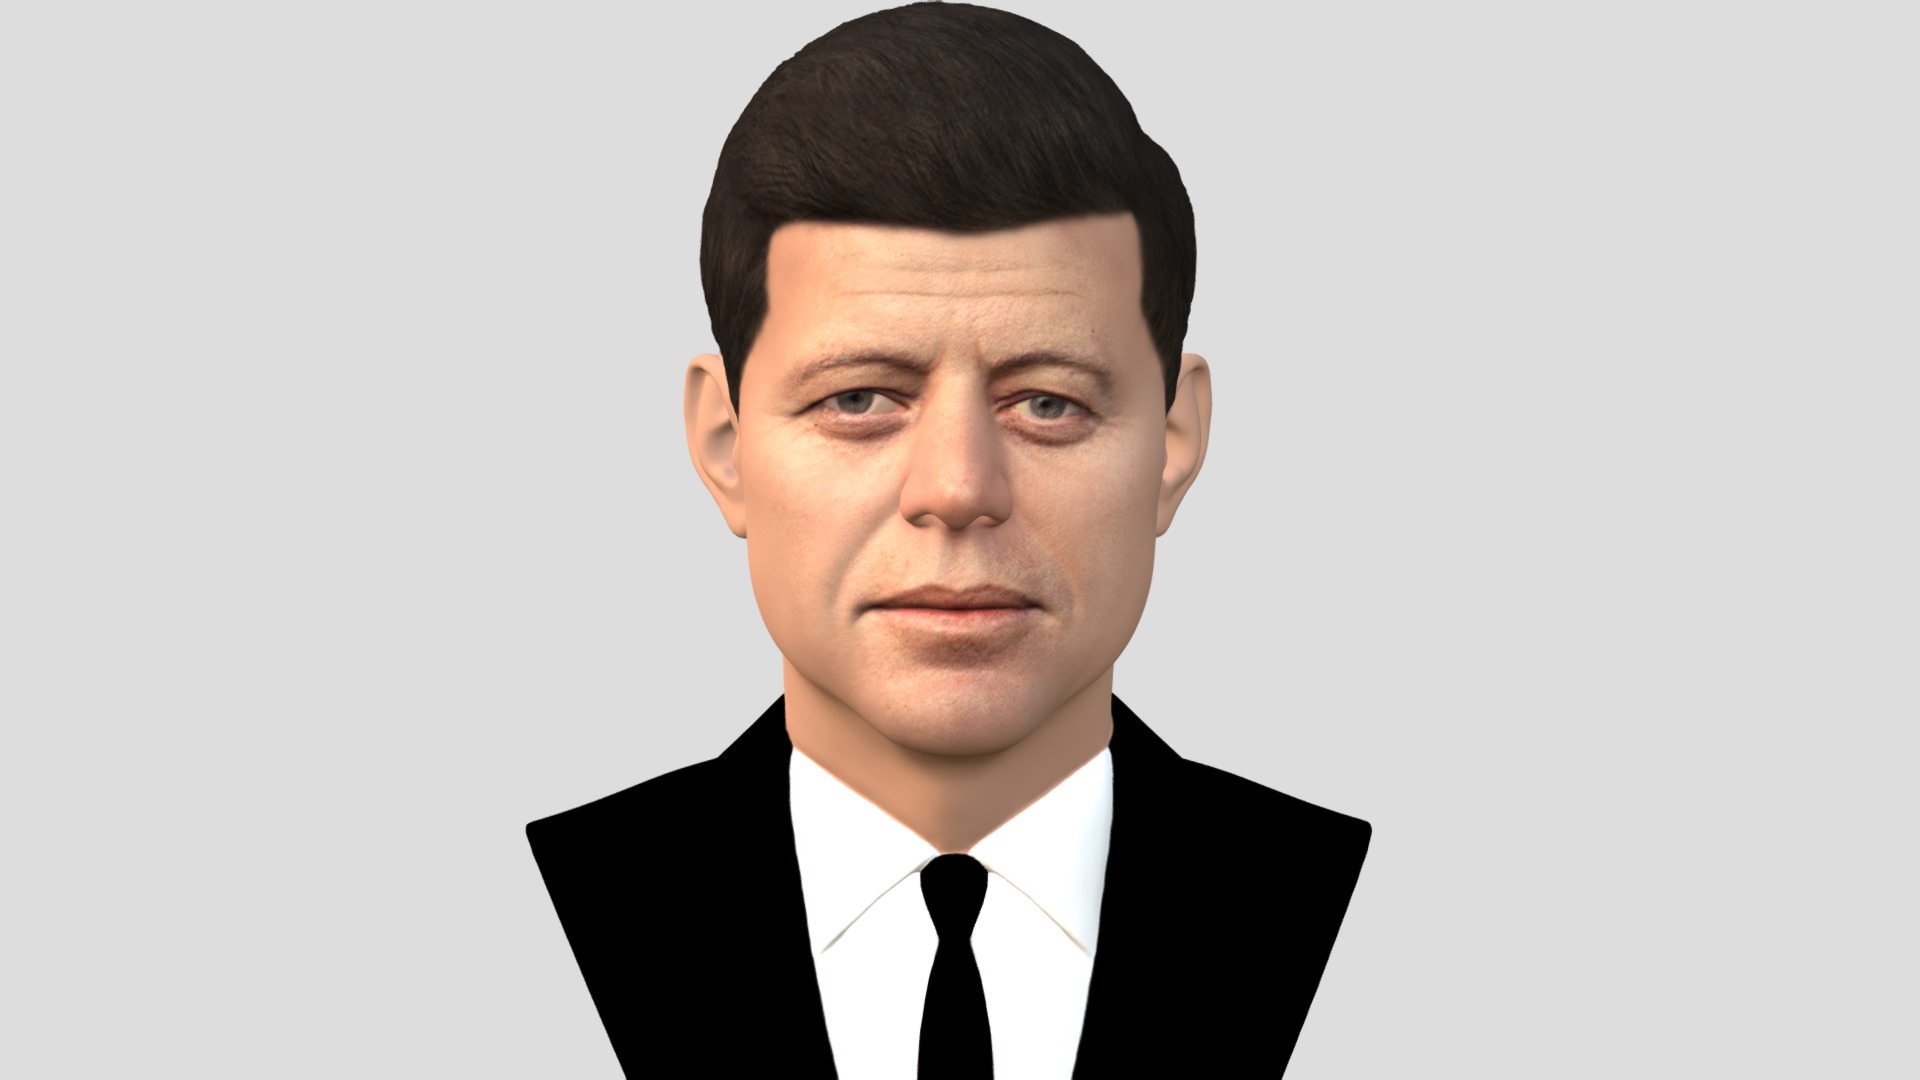 3D model John F Kennedy bust for full color 3D printing - This is a 3D model of the John F Kennedy bust for full color 3D printing. The 3D model is about a man in a suit.